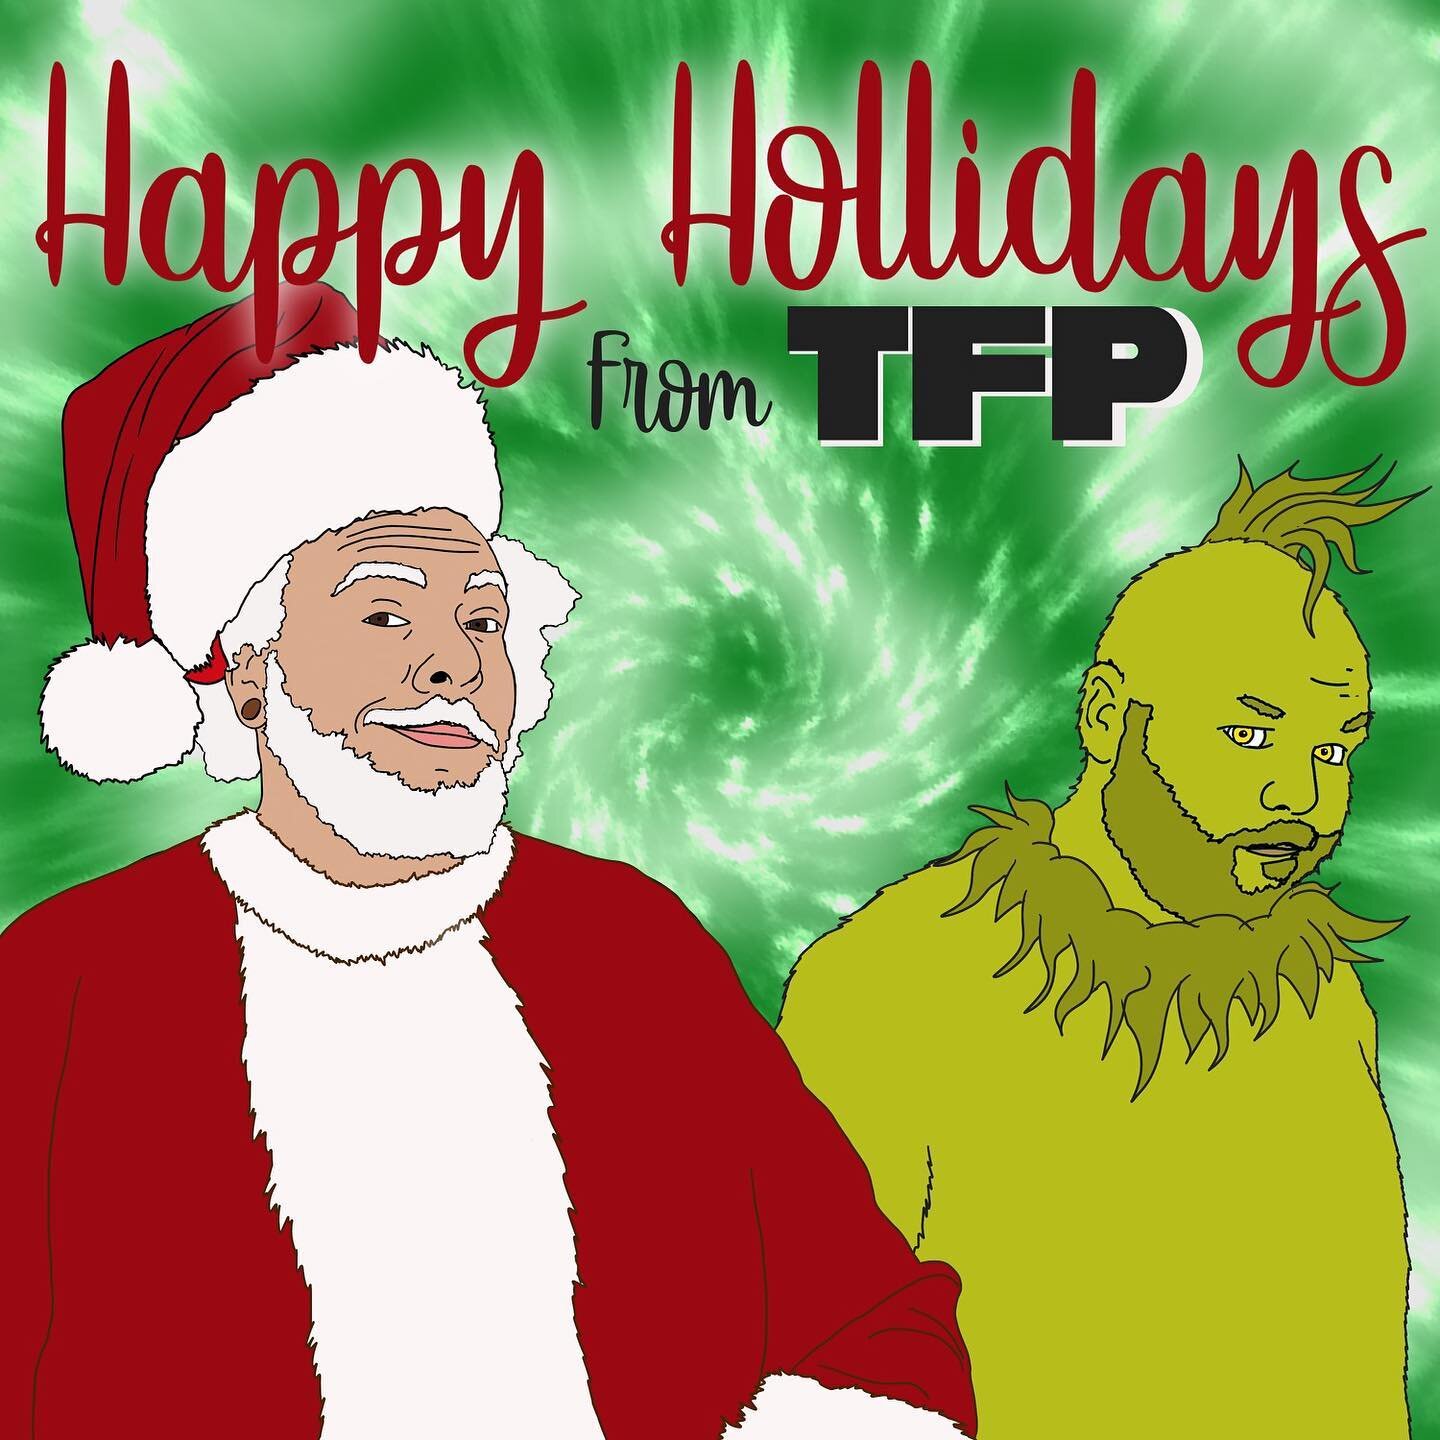 may your cups be full of the finest spirits and your pipe always be on the green hit. to all of our listeners/homies worldwide, have a happy and safe holiday this year. 2022 can&rsquo;t be worse than 2021&hellip; right? #holiday #holidayseason #holid